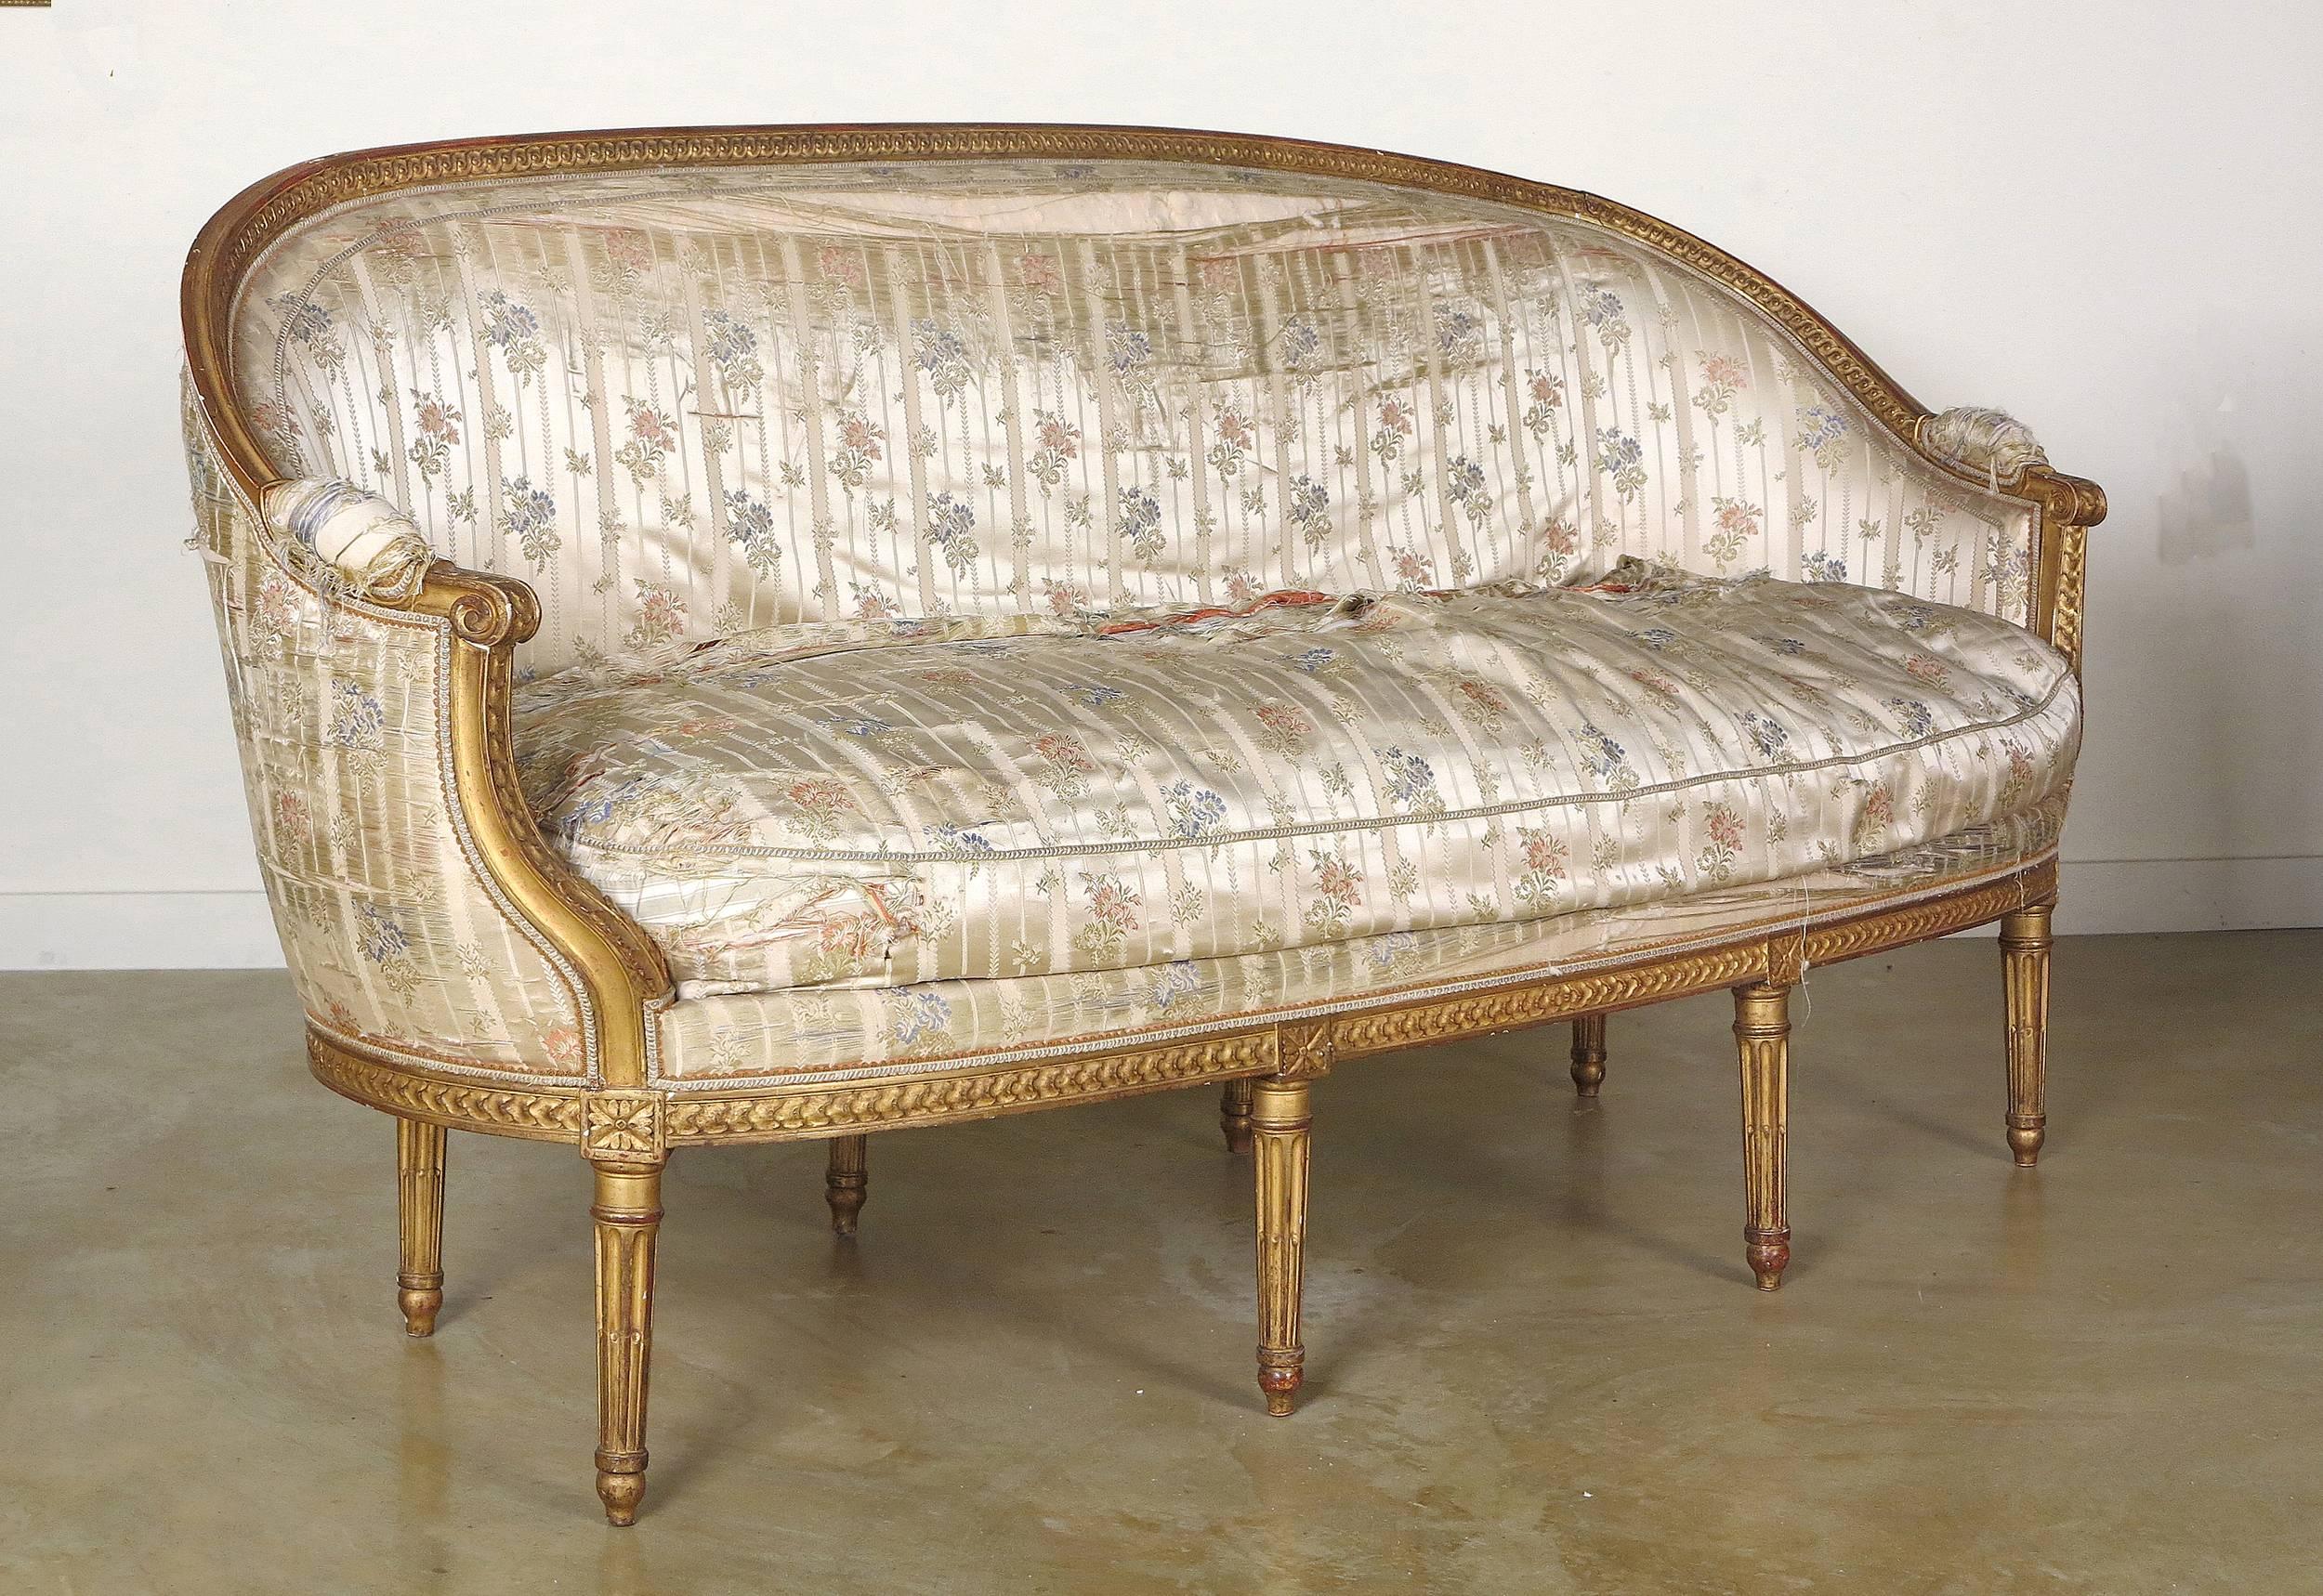 A fine Louis XVI giltwood Canapé En Corbeille
By Claude I Sene, 
18th Century

The guilloche-carved top rail, continuing to the sides with padded armrests, raised on foliate carved incurved supports, above the bow-fronted seat with loose